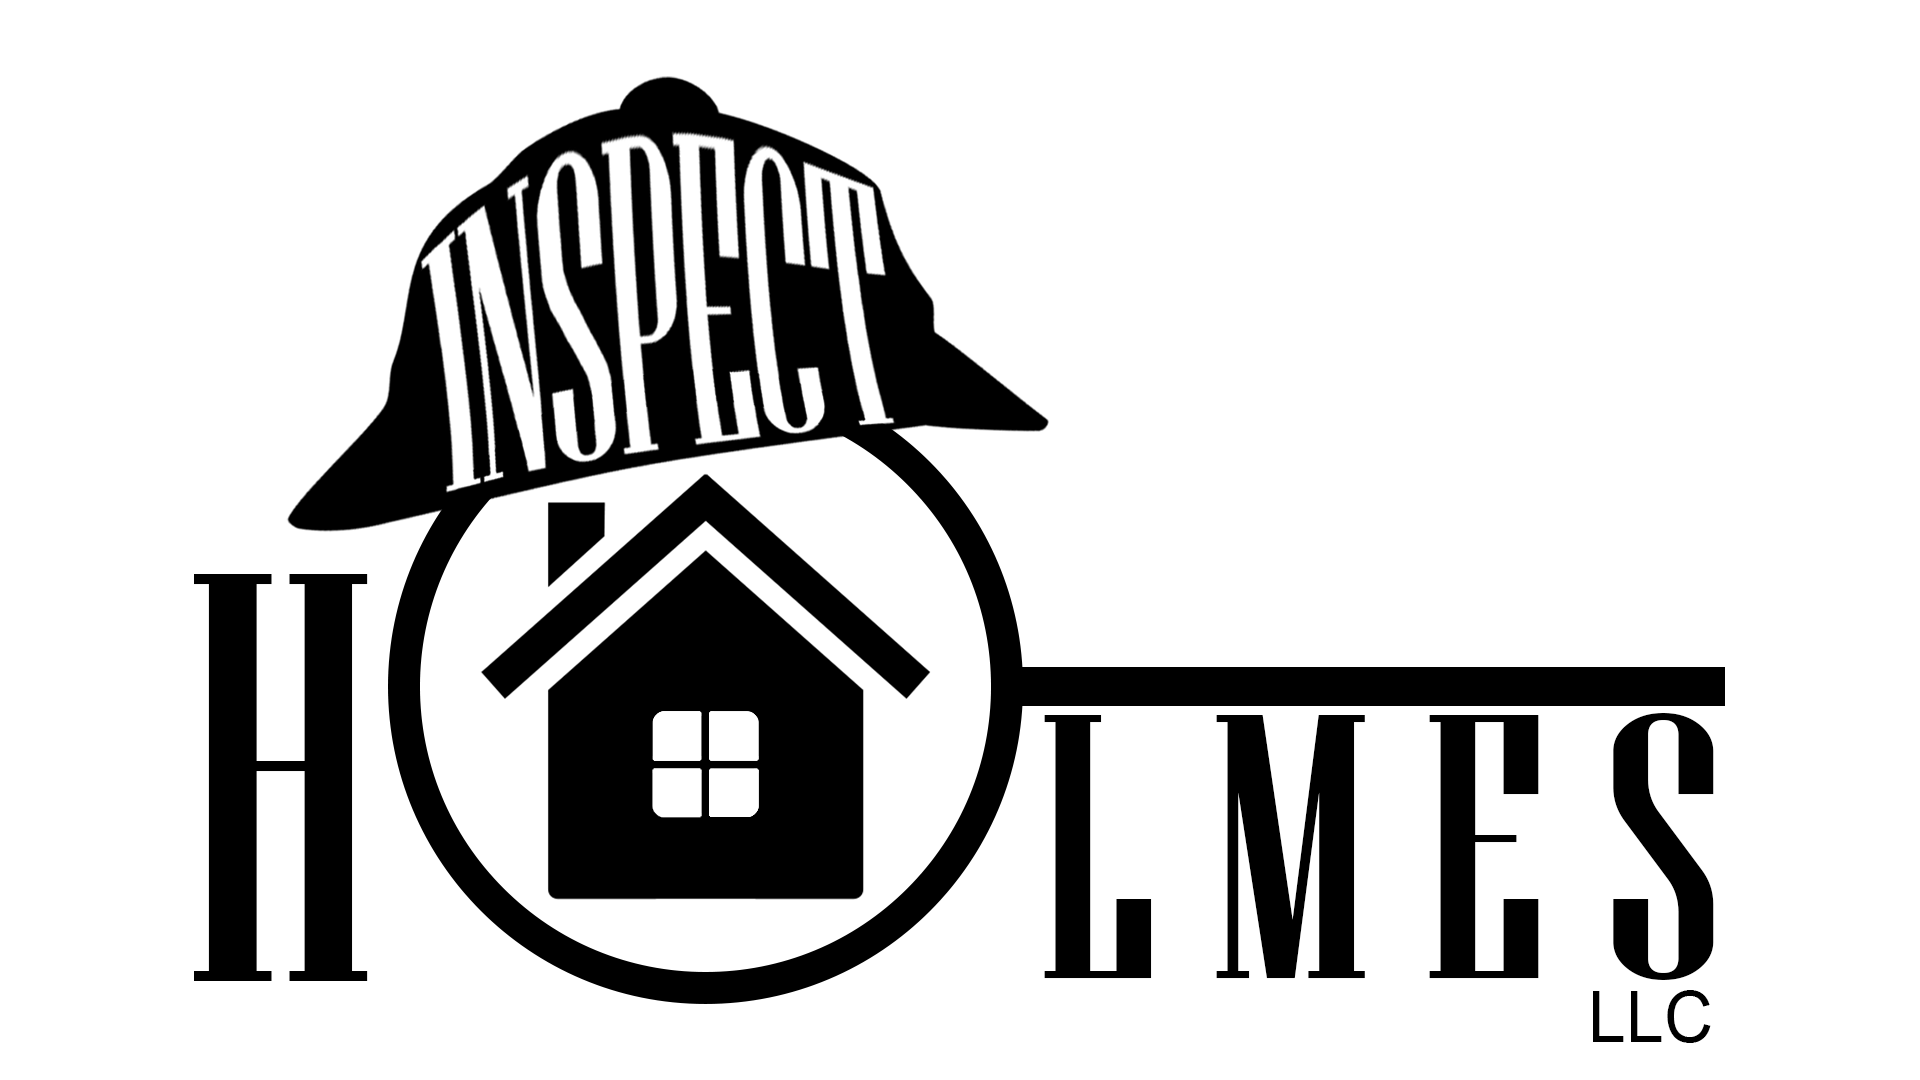 Services-Inspect Holmes 702-401-4989